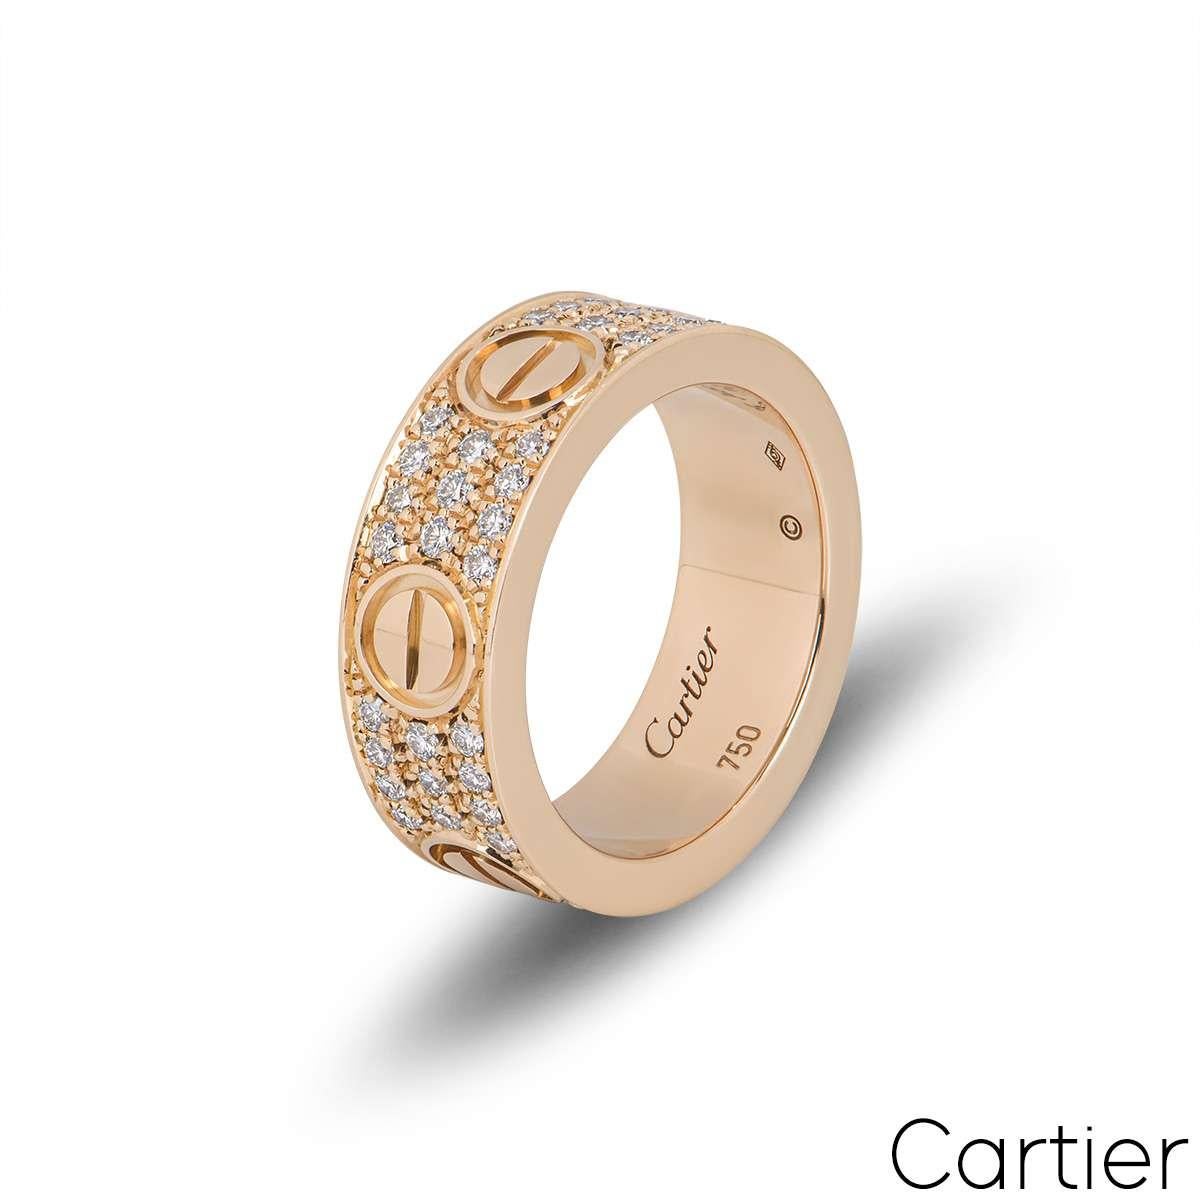 An 18k rose gold diamond ring by Cartier from the Love collection. Comprises of the iconic screw motifs with 66 round brilliant cut diamonds, pave set between each motif with a total diamond weight of 0.70ct. The ring measures 6.5mm in width, is a